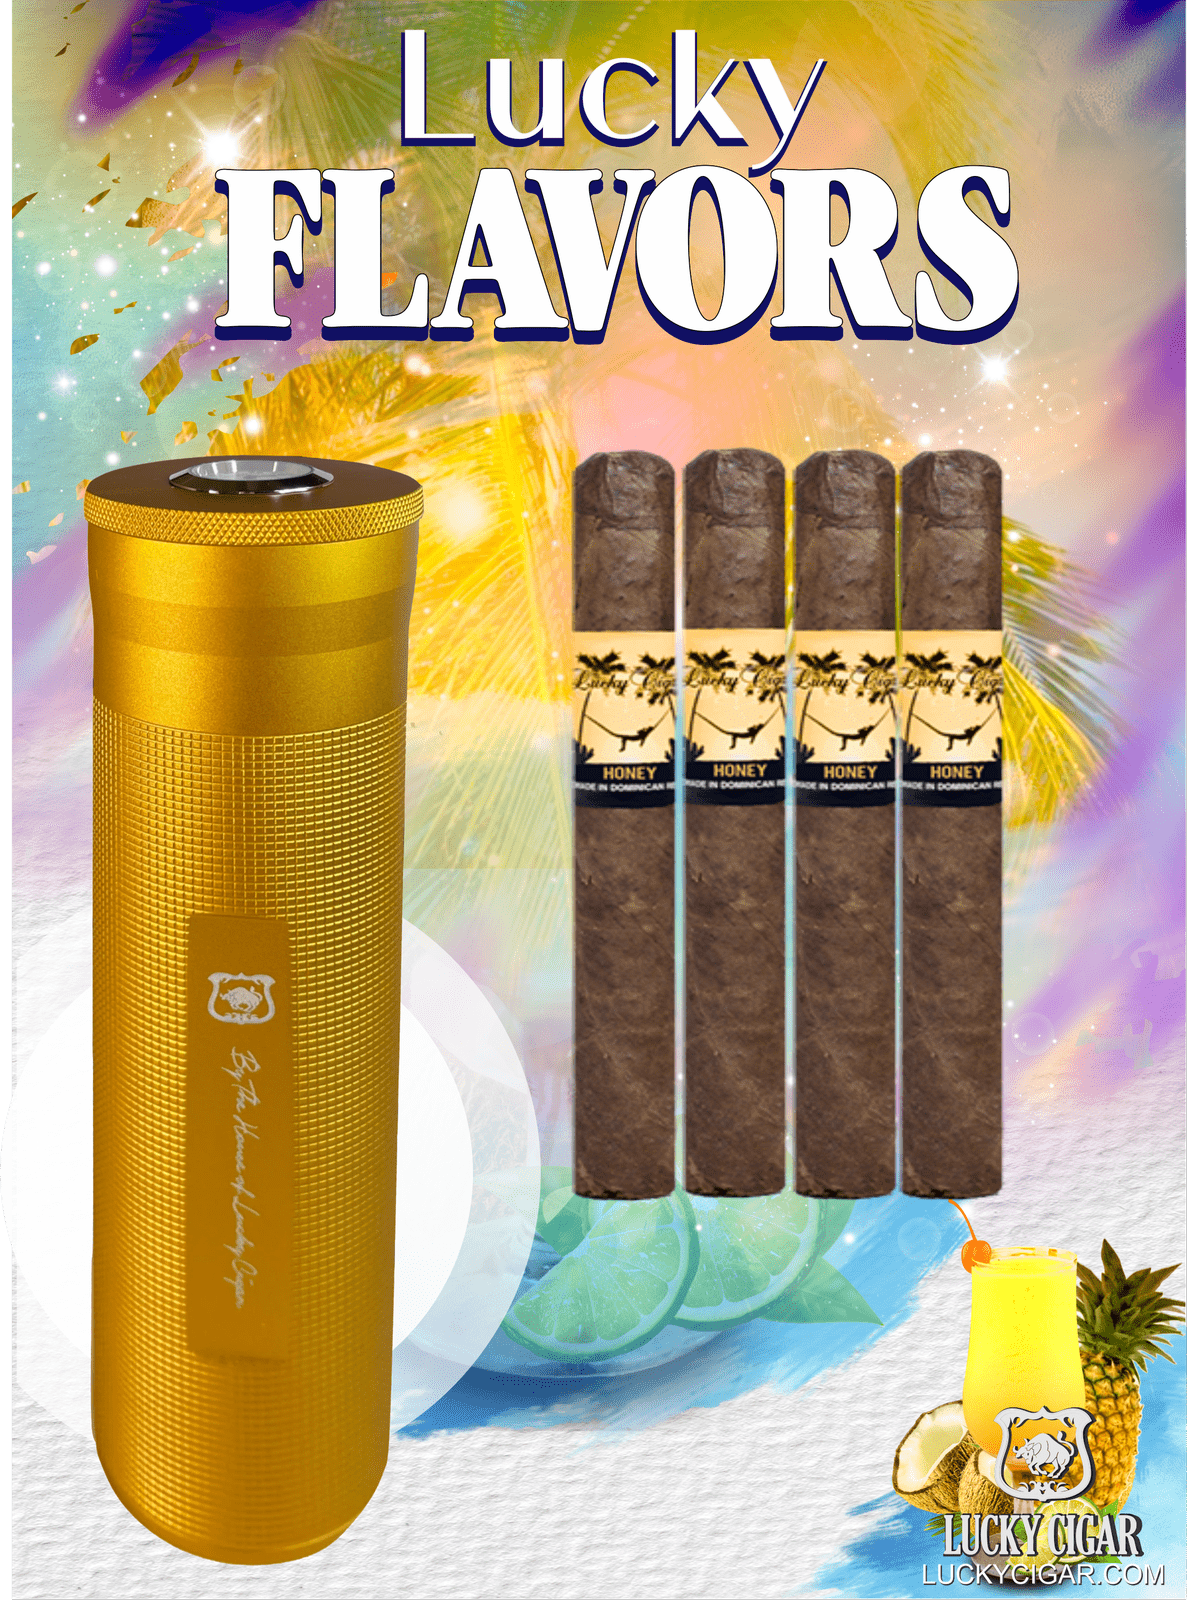 Flavored Cigars: Lucky Flavors 4 Honey Cigar Set with Travel Humidor – Lucky  Cigar